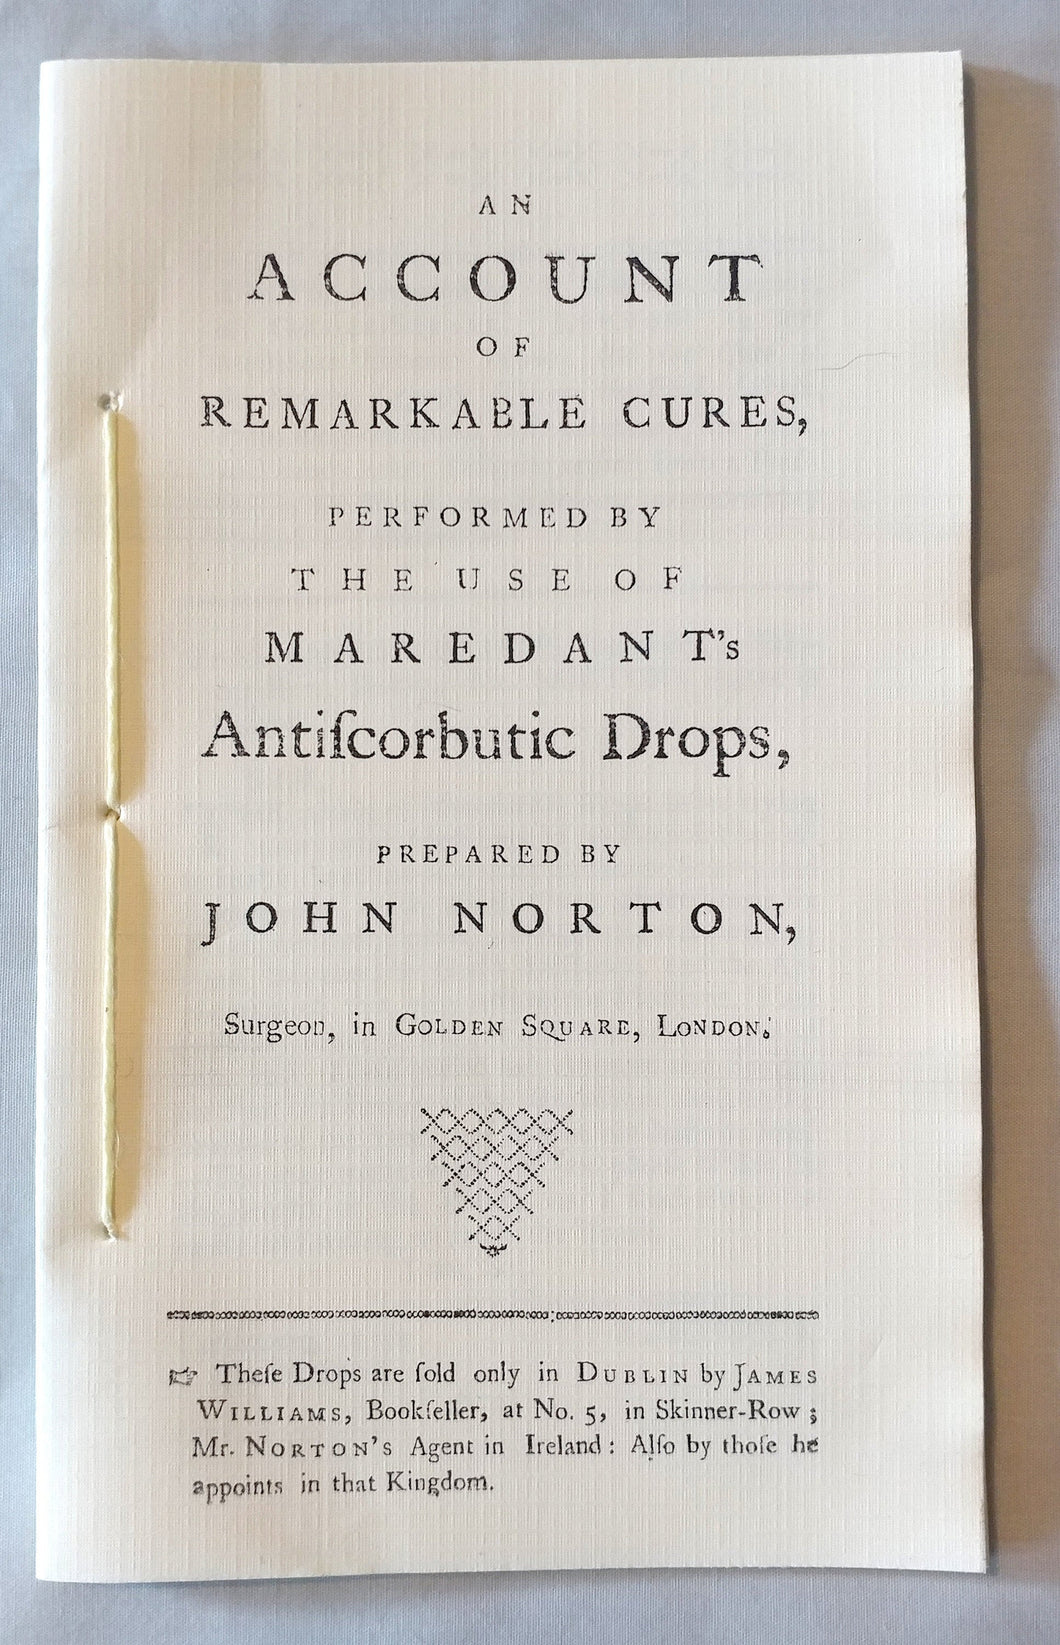 An Account of Remarkable Cure, Performed by the Use of Maredant's Antiscorbutic Drops